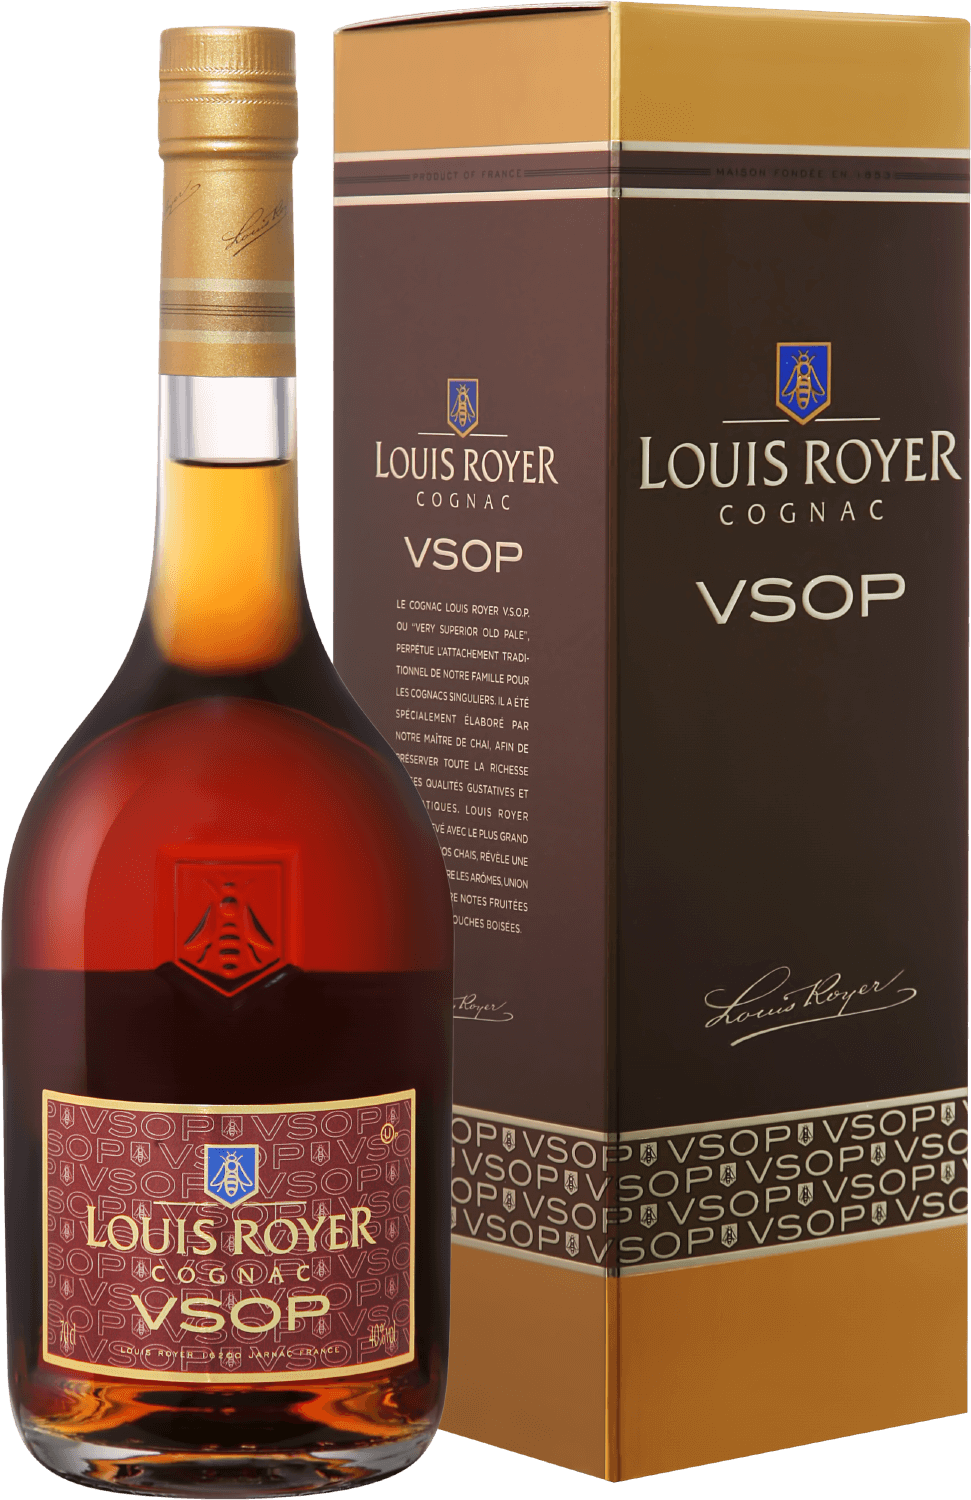 louis royer cognac grande champagne extra gift box Louis Royer Cognac VSOP Kosher (gift box)